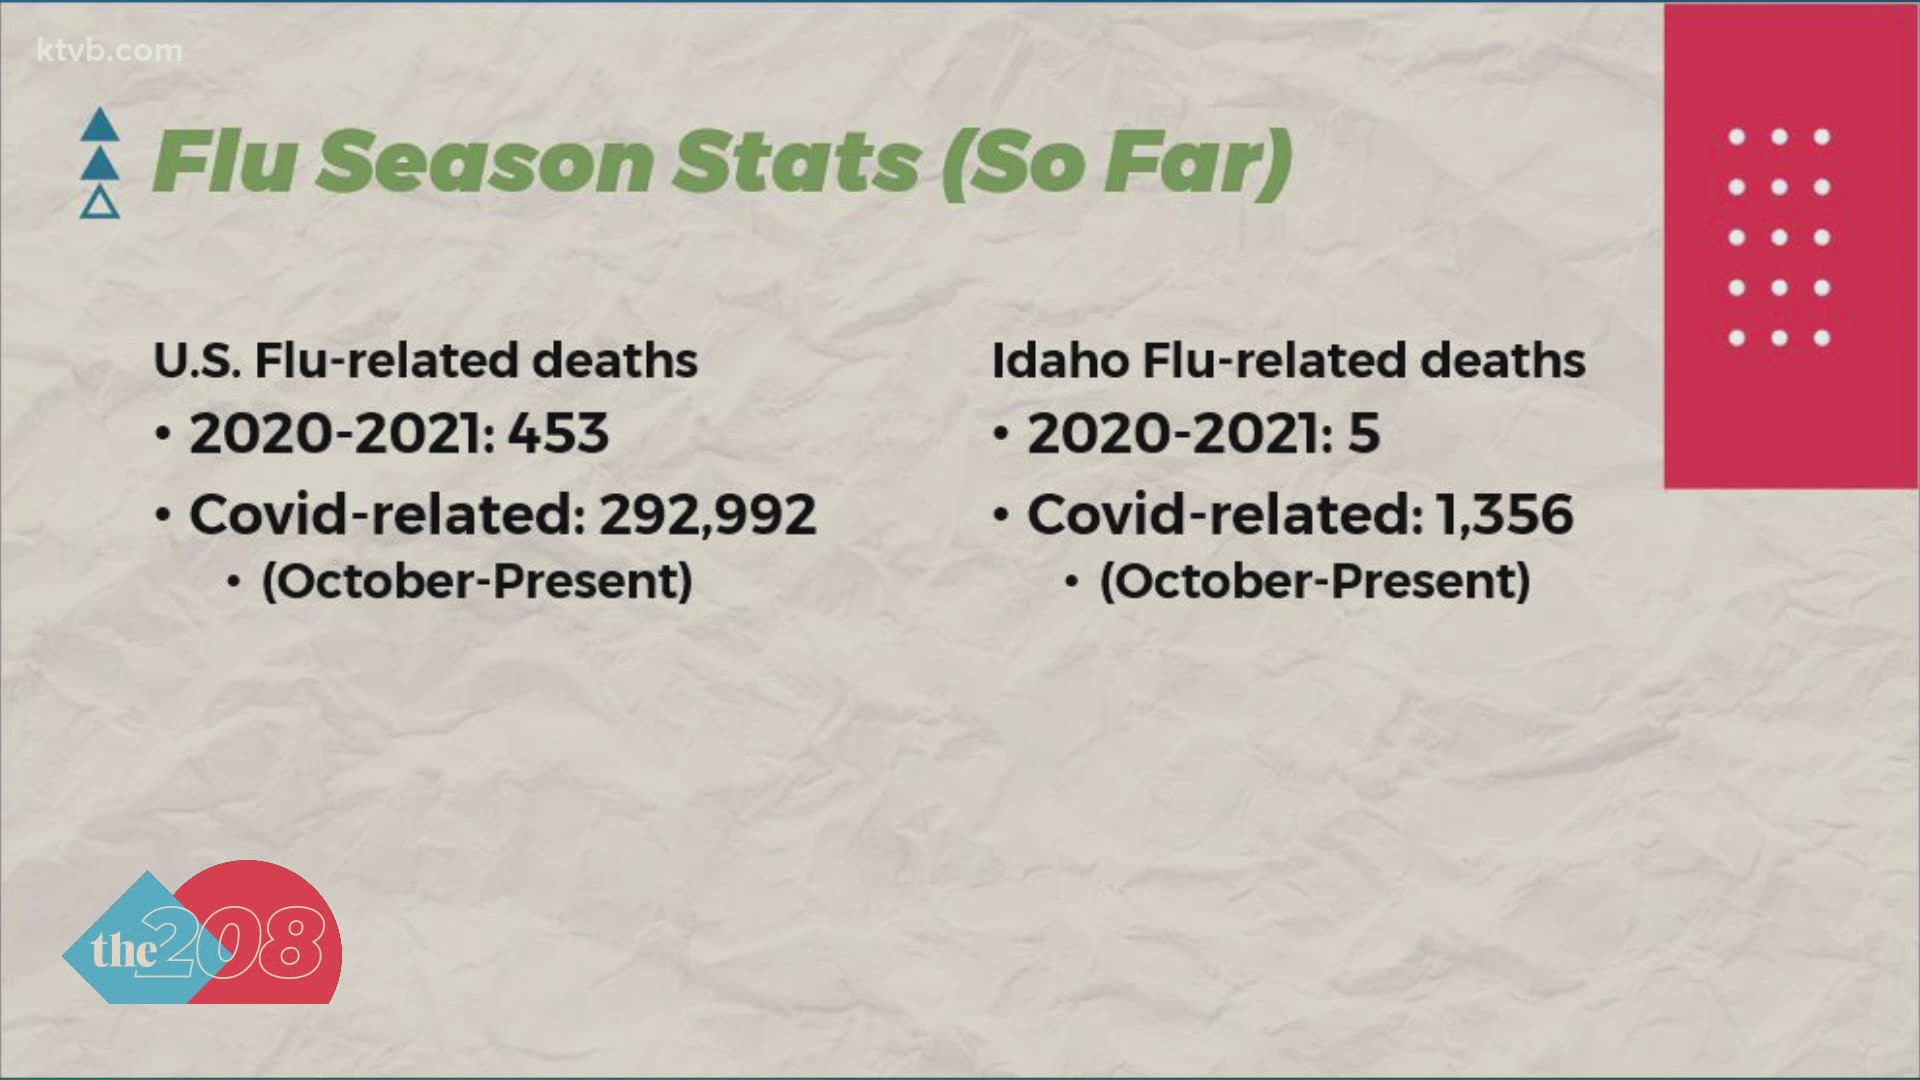 Although the season is not over, the CDC estimates there have been 453 flu-related deaths in the United States. In Idaho, there have been five flu-related deaths.